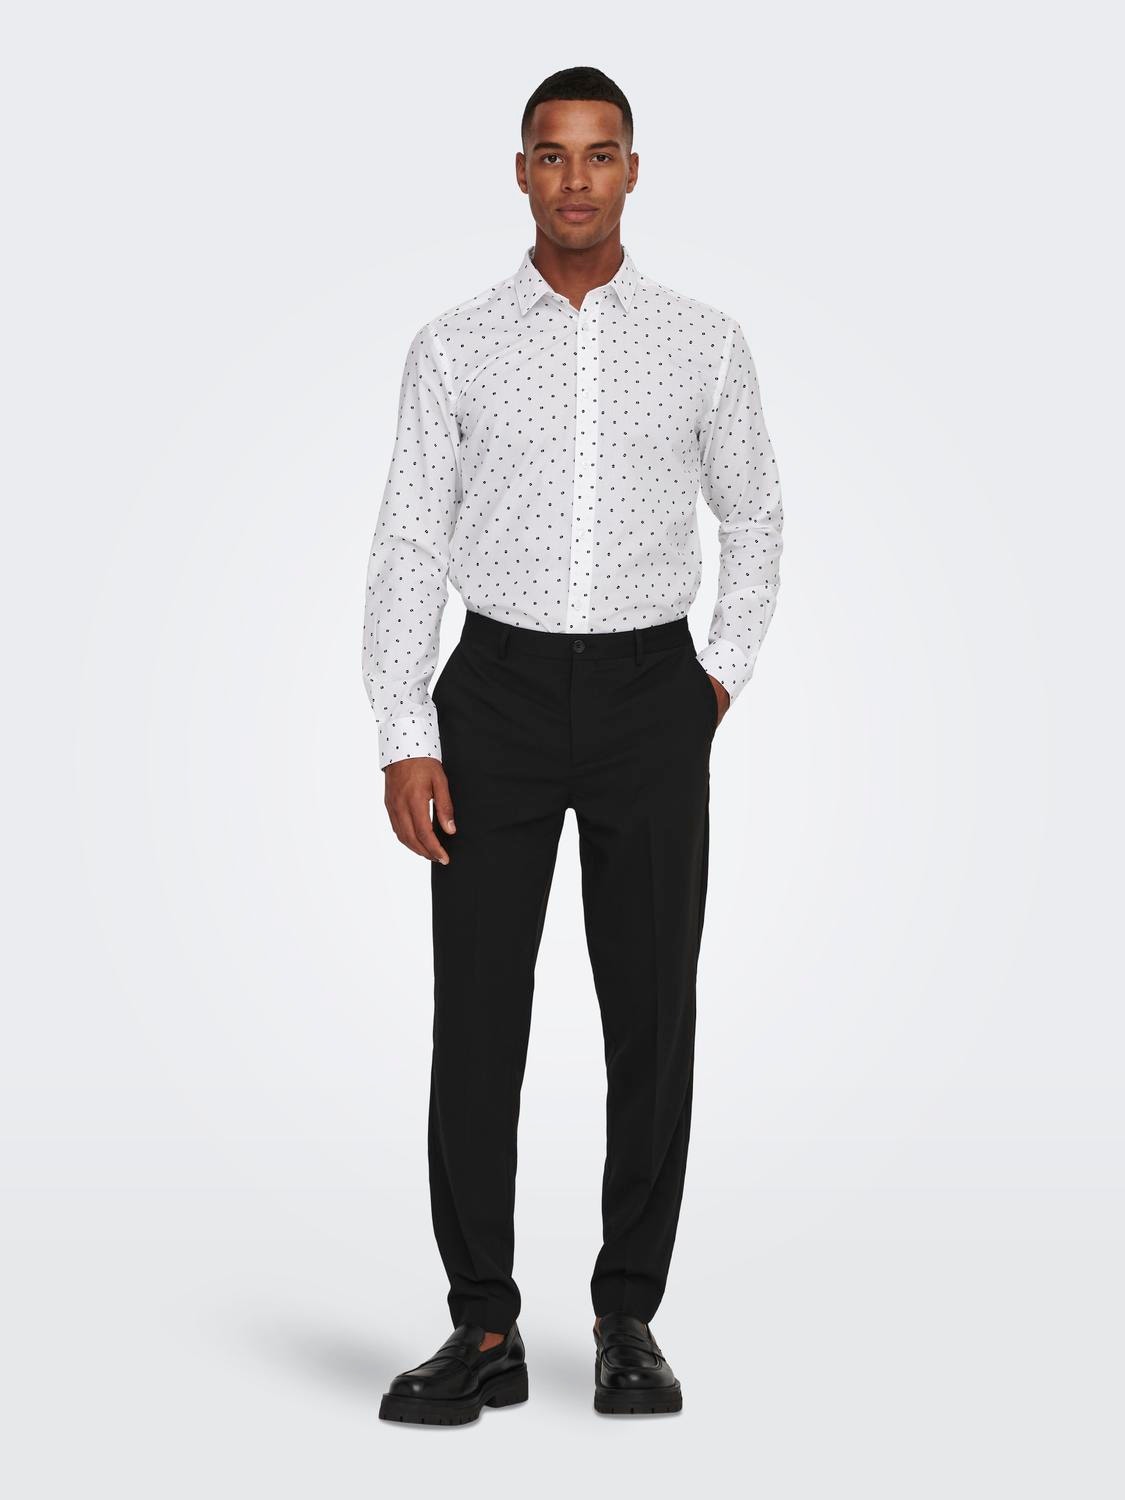 ONLY & SONS Slim Fit Tailored Trousers -Black - 22026271